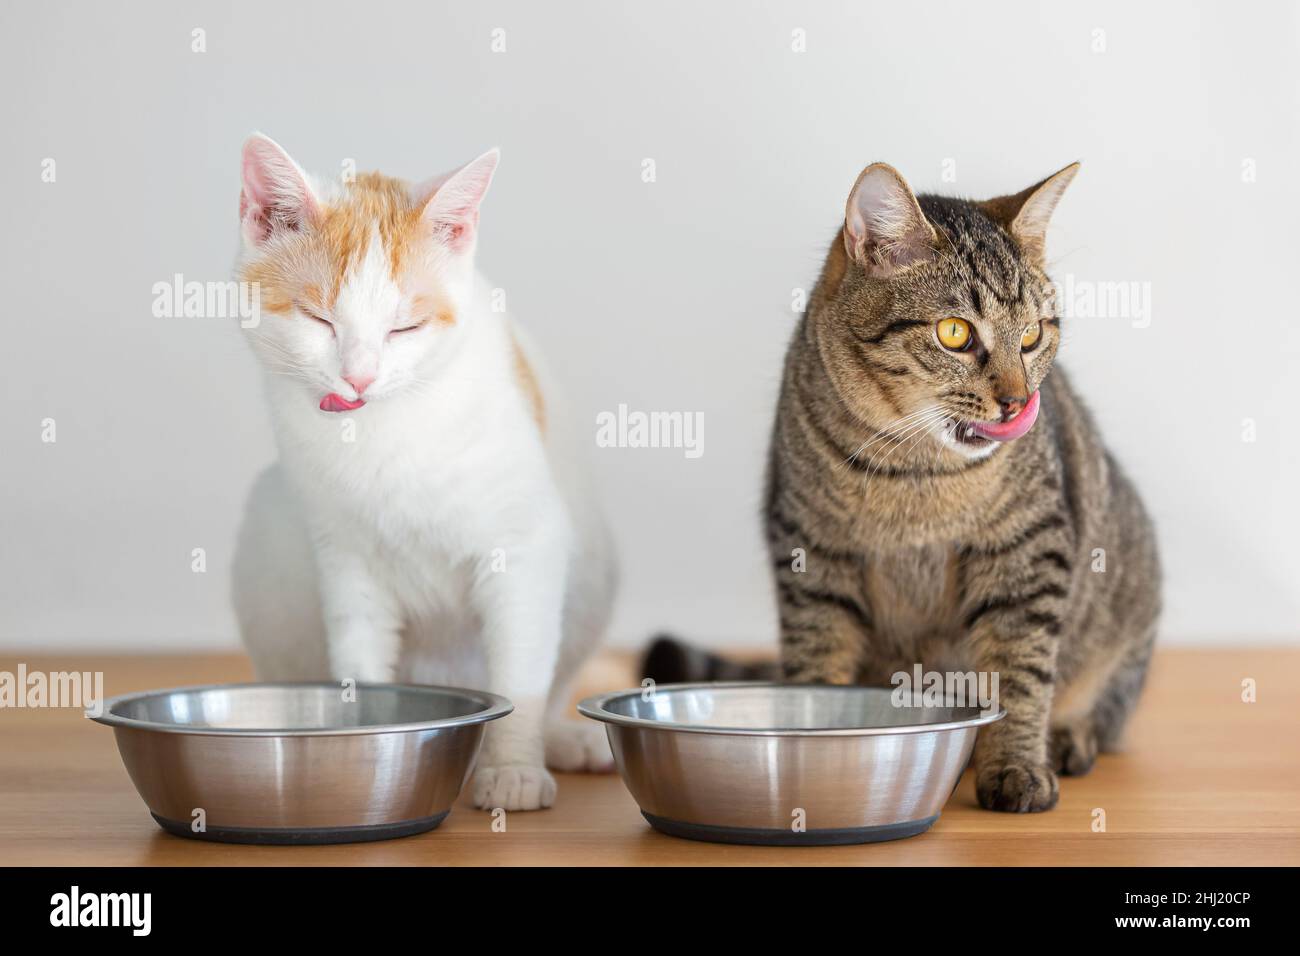 Two domesticated cats having a meal from two bowls Stock Photo